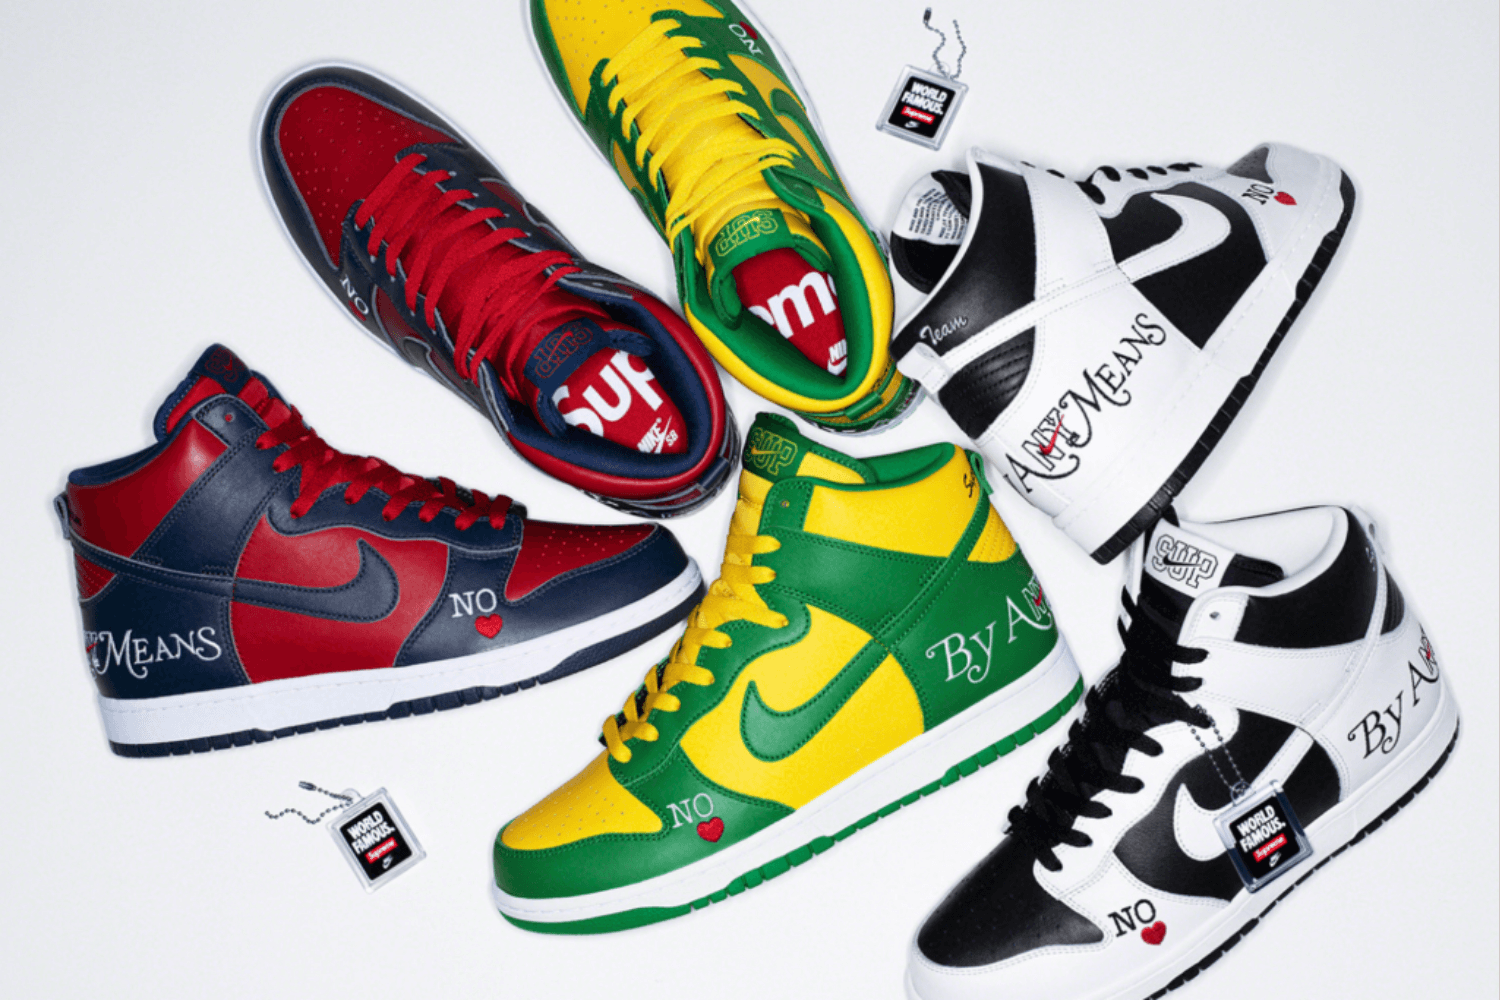 Supreme dropped das Nike SB Dunk High 'By Any Means' Pack